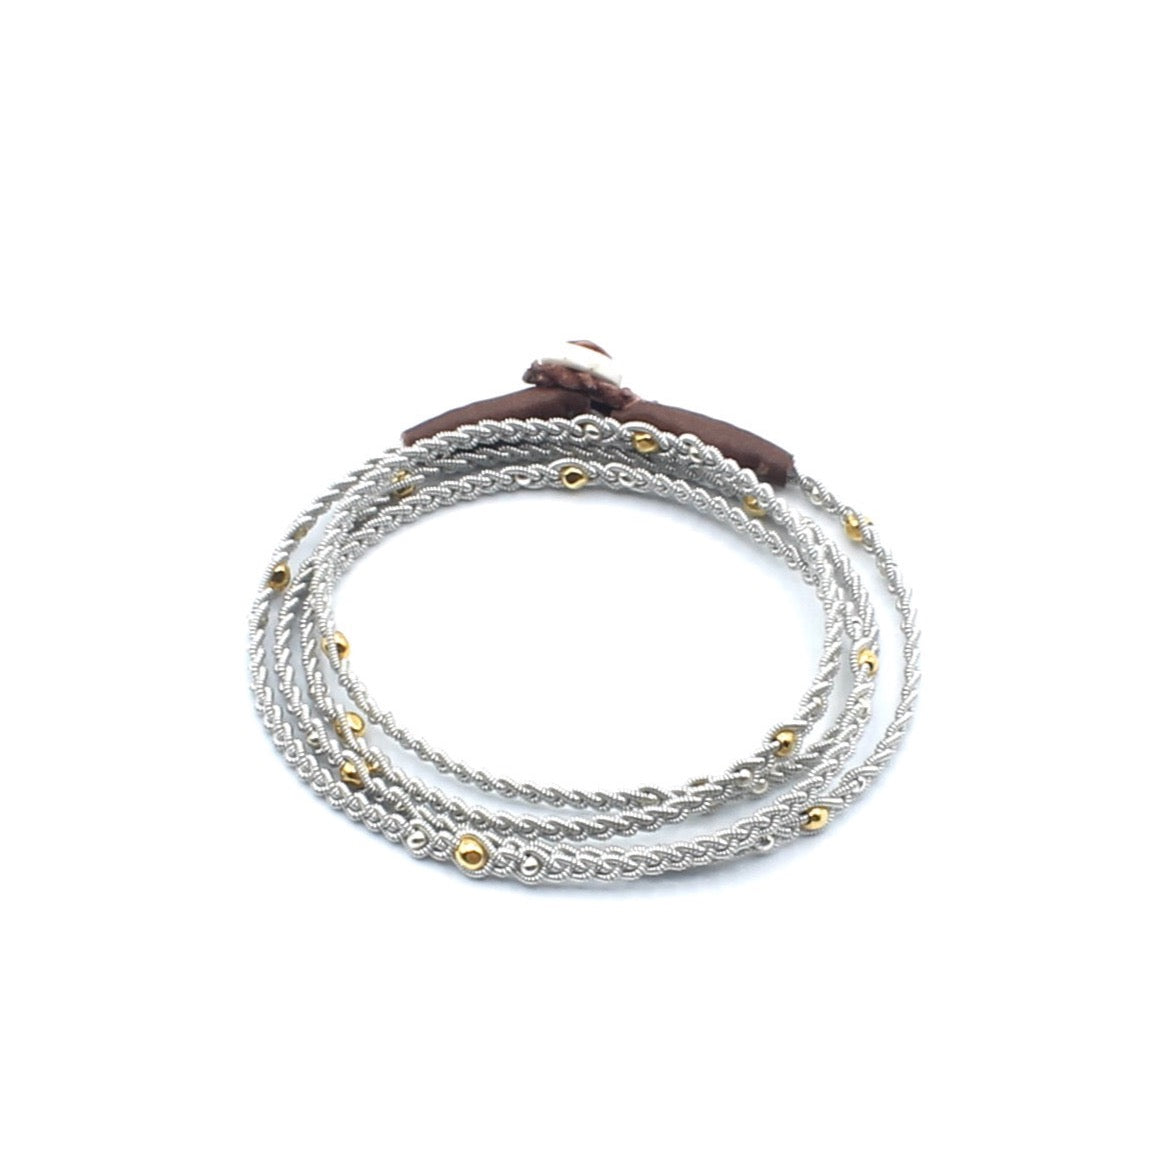 Wrap Bracelet with Silver and Gold Beads